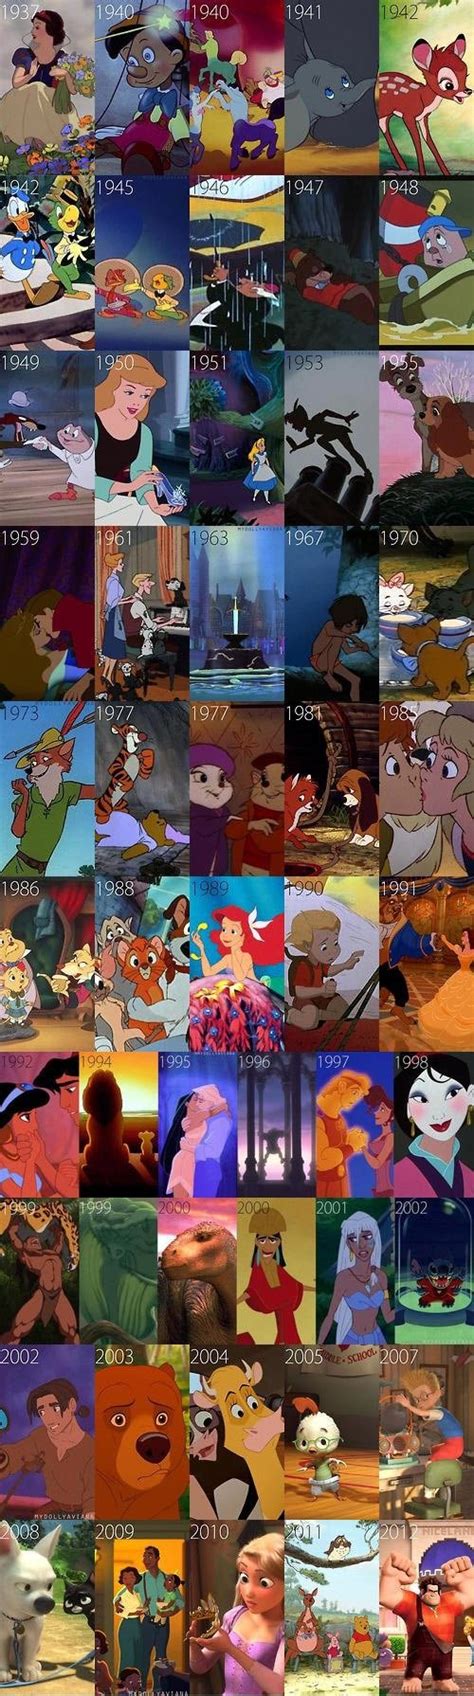 Disney needs to bring back 2d animation. A Summary of All Disney Animated Films (Infographic)